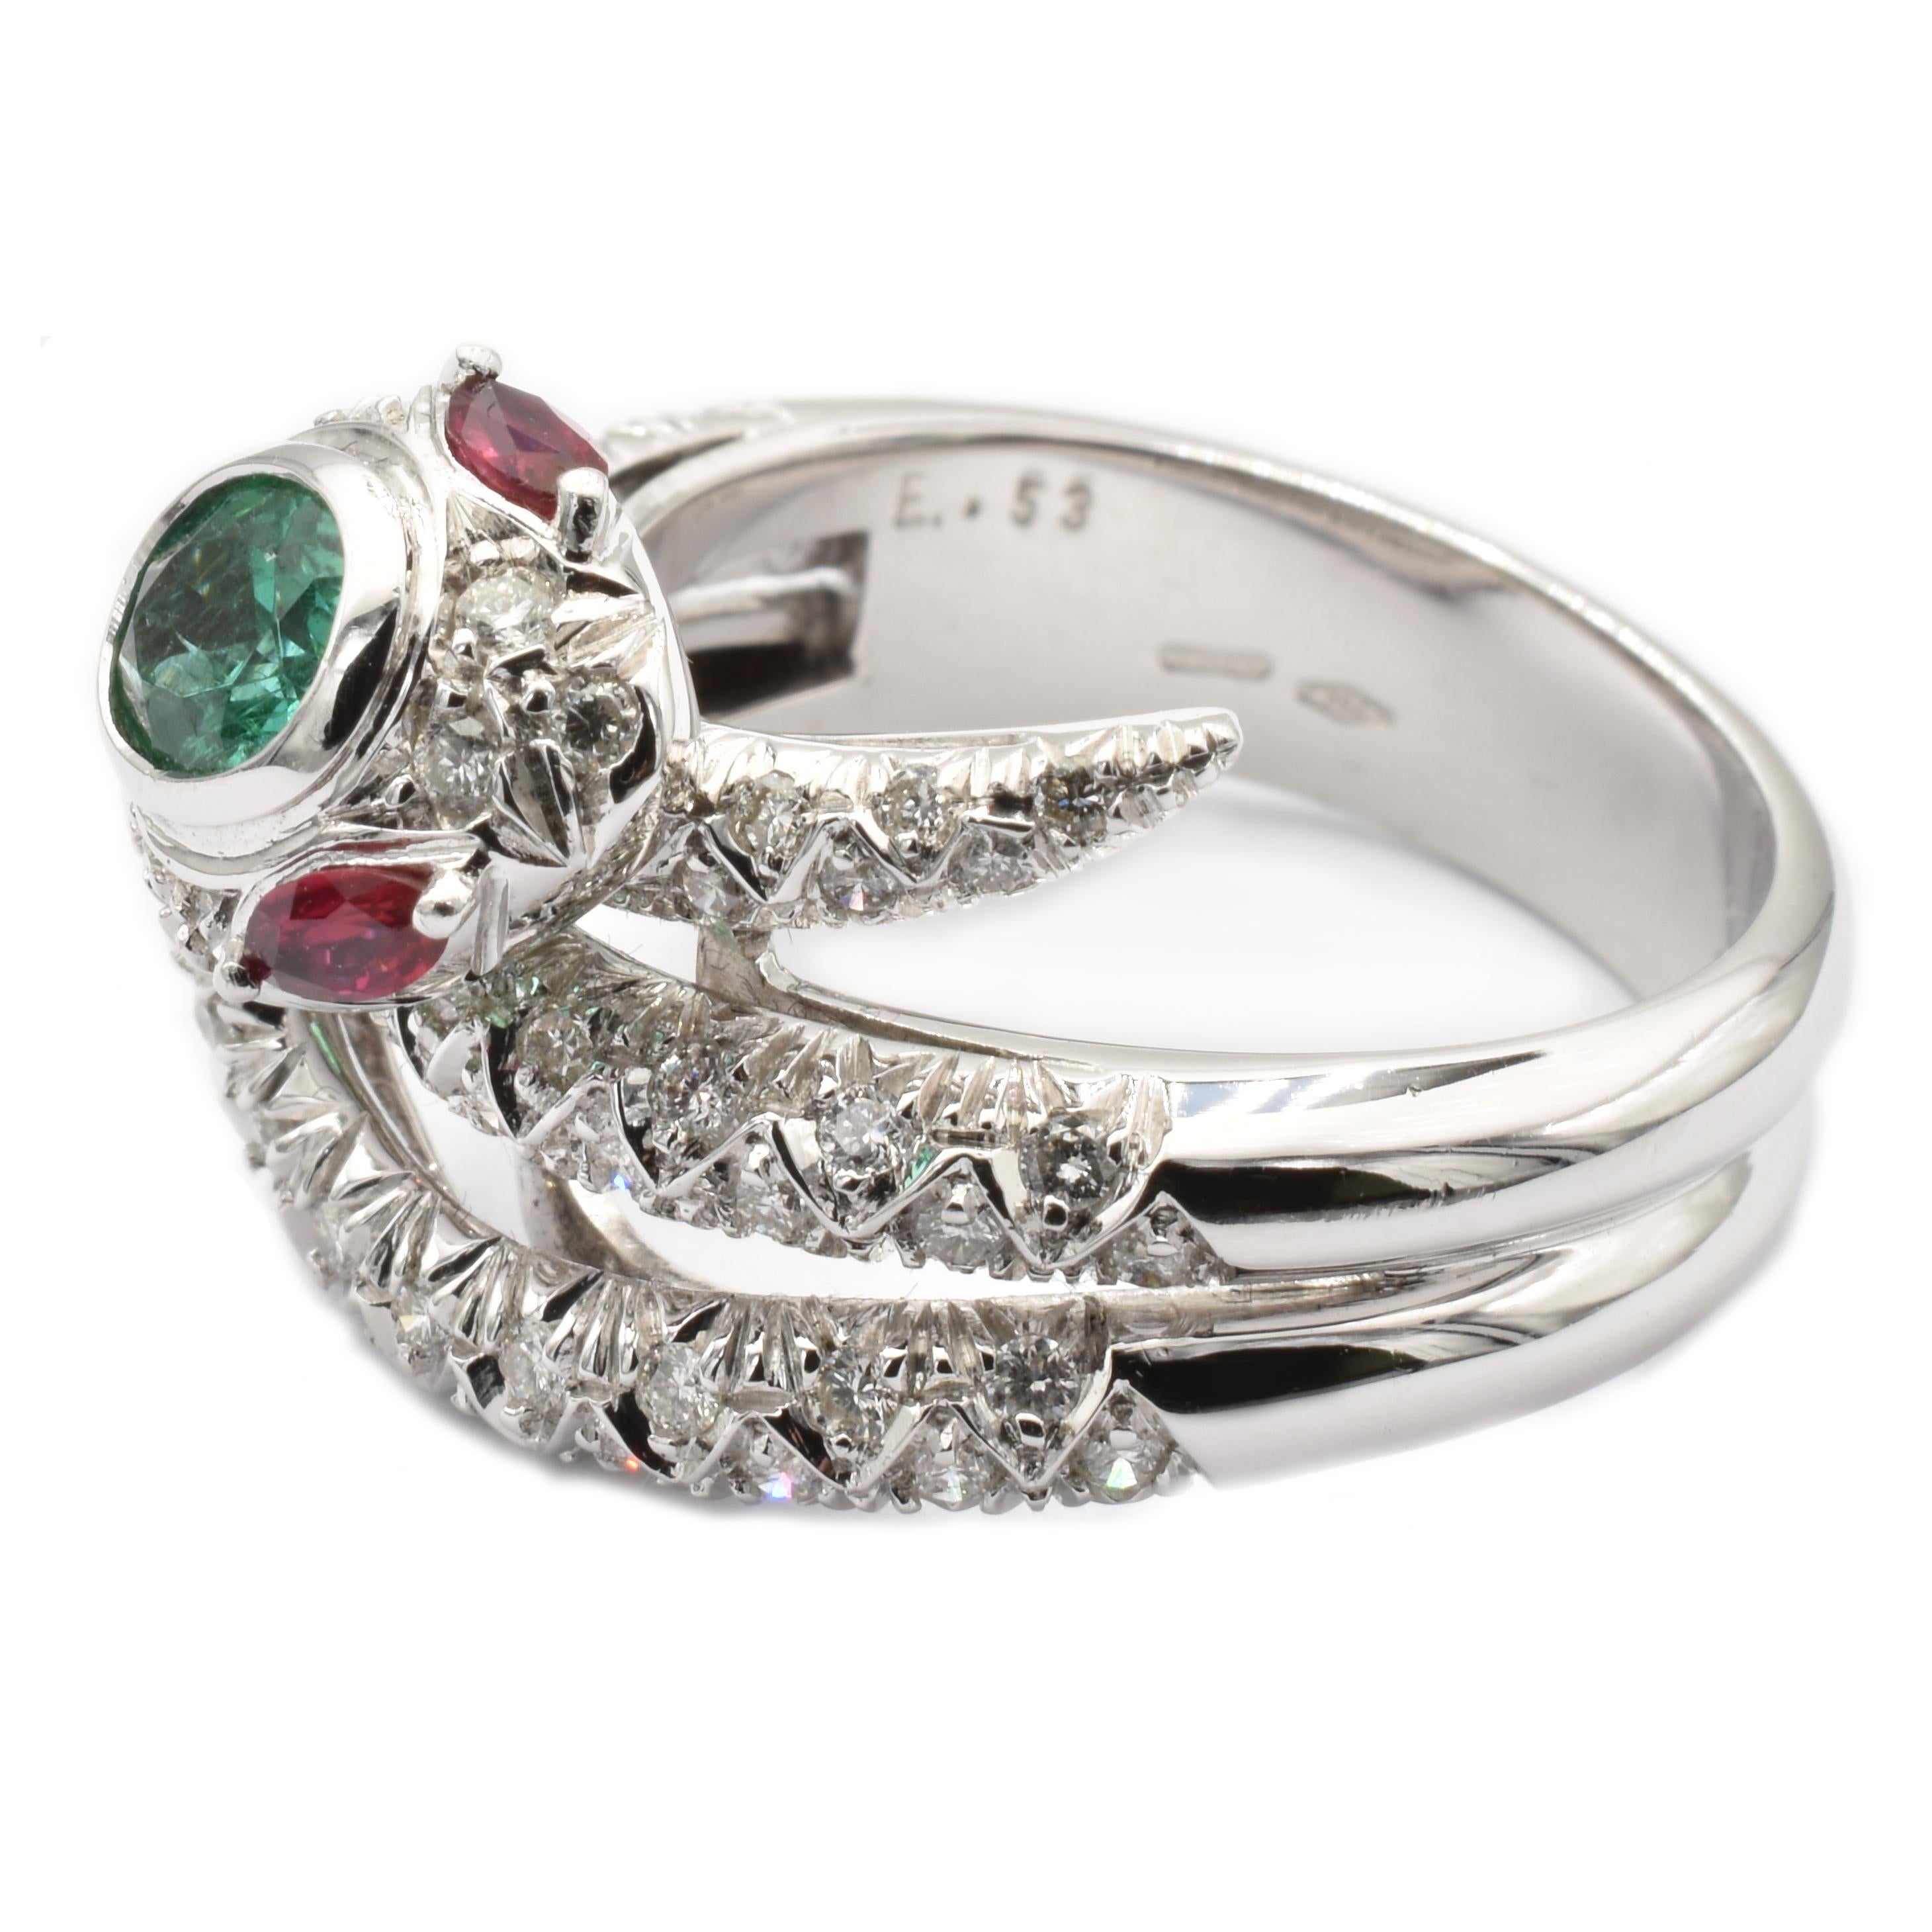 Gilberto Cassola 18Kt White Gold Snake Ring with a Oval Emerald, two Marquise Rubies and Diamonds.
Handmade in our Atelier in Valenza Italy.
Bright Green Natural Emerald Oval sized mm 6.00 X 4.50.  Weight ct 0.53
Intense Red Natural Ruby Marquises